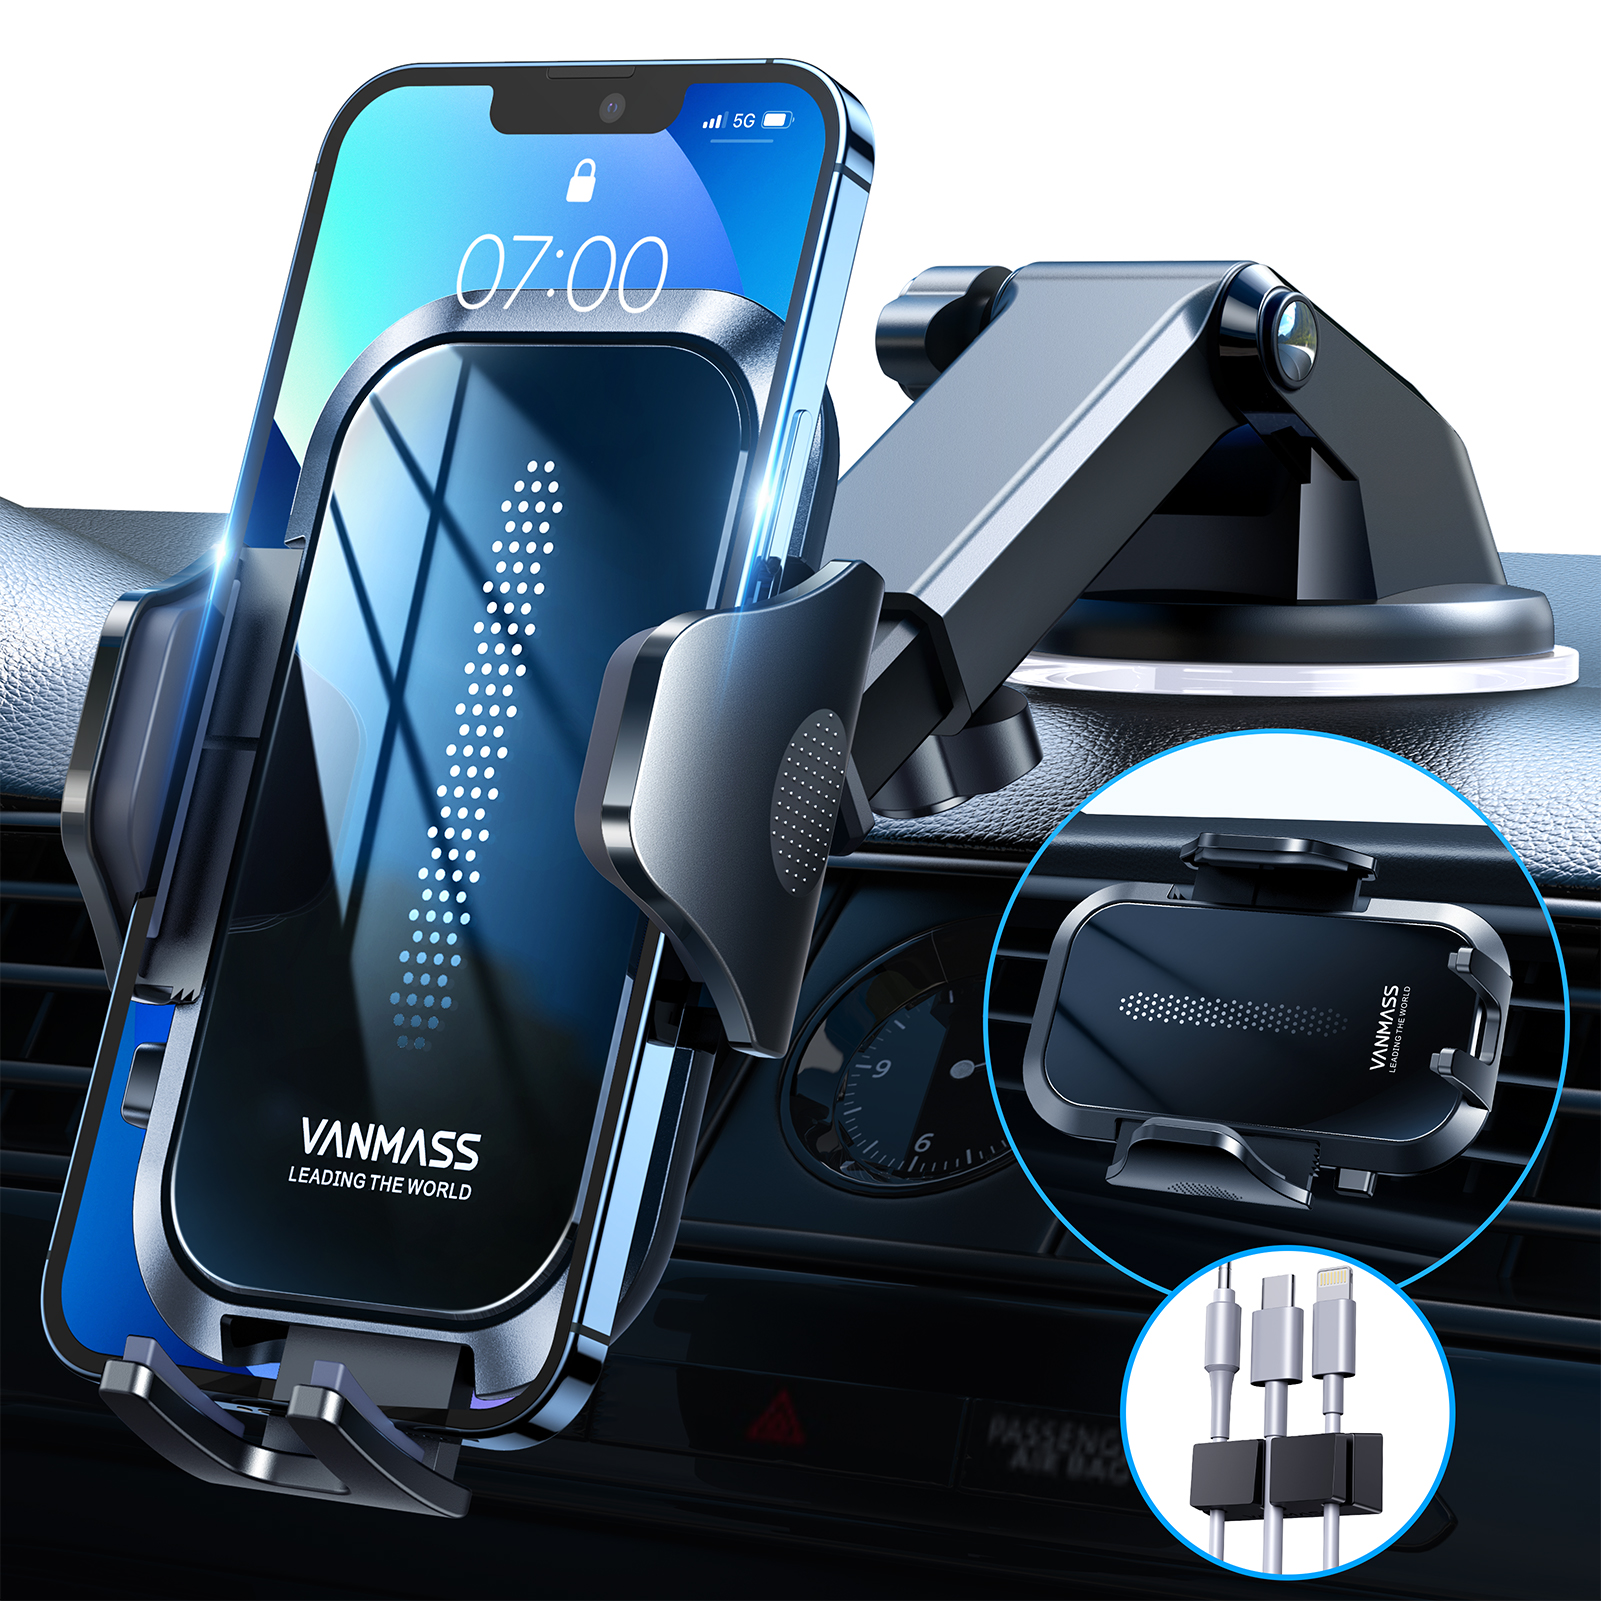 Double Stable Support Upgraded VANMASS Car Phone Mount, Cell Phone Holder for Dashboard Windshield Air Vent Compatible with iPhone 13 Pro Max 12 11 Samsung Galaxy Truck Heavy Duty Vehicle 